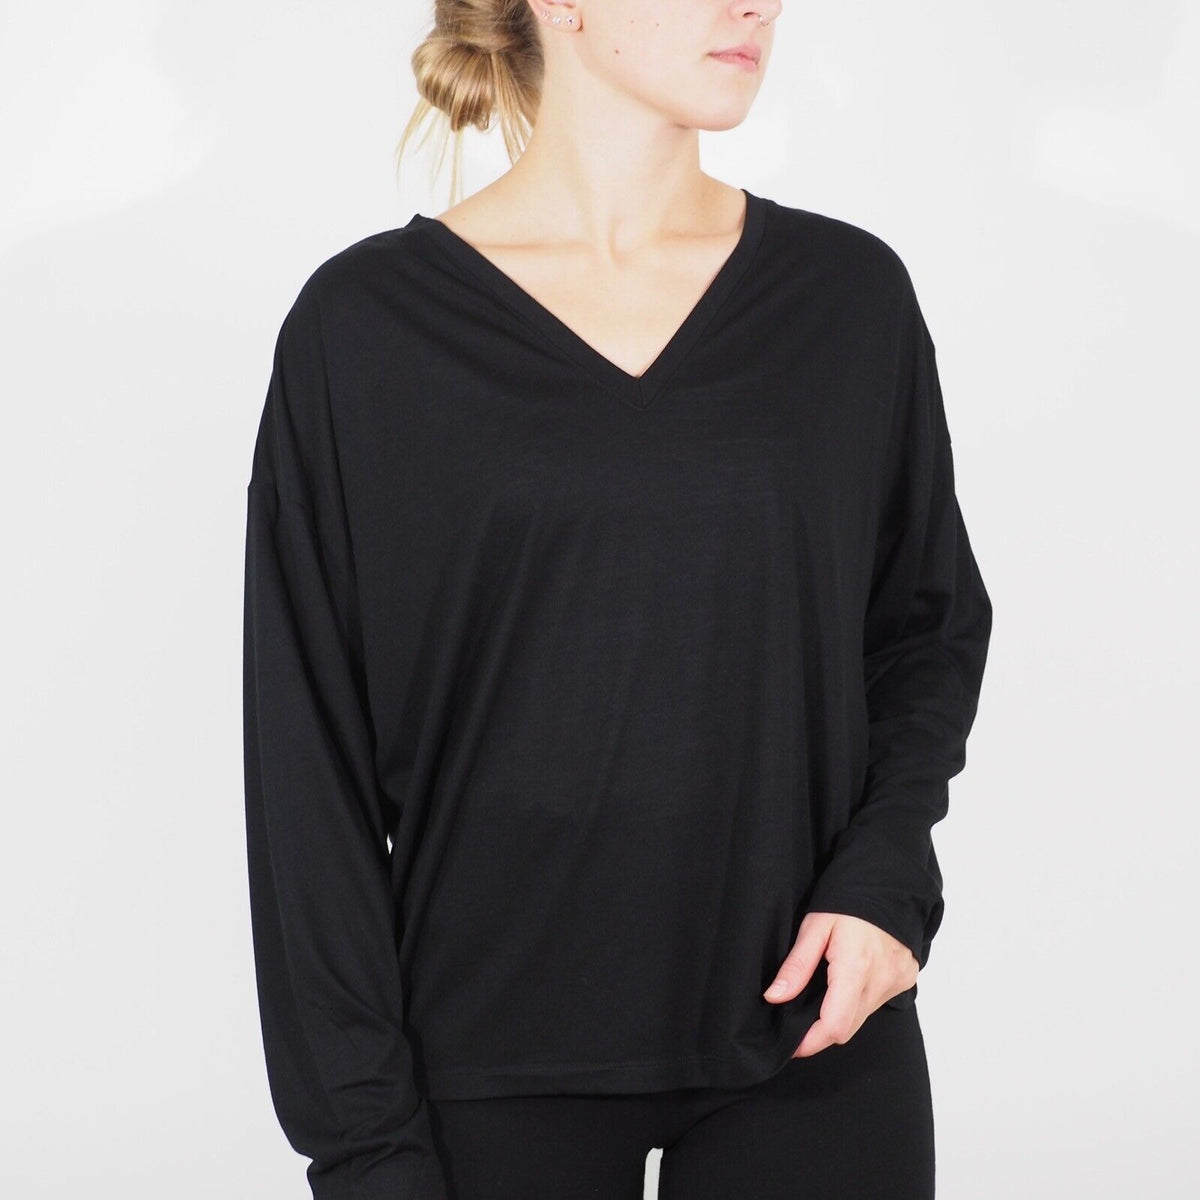 Womens Ex M&S Long Sleeve Top Black V Neck Casual Stretch Ladies Blouse